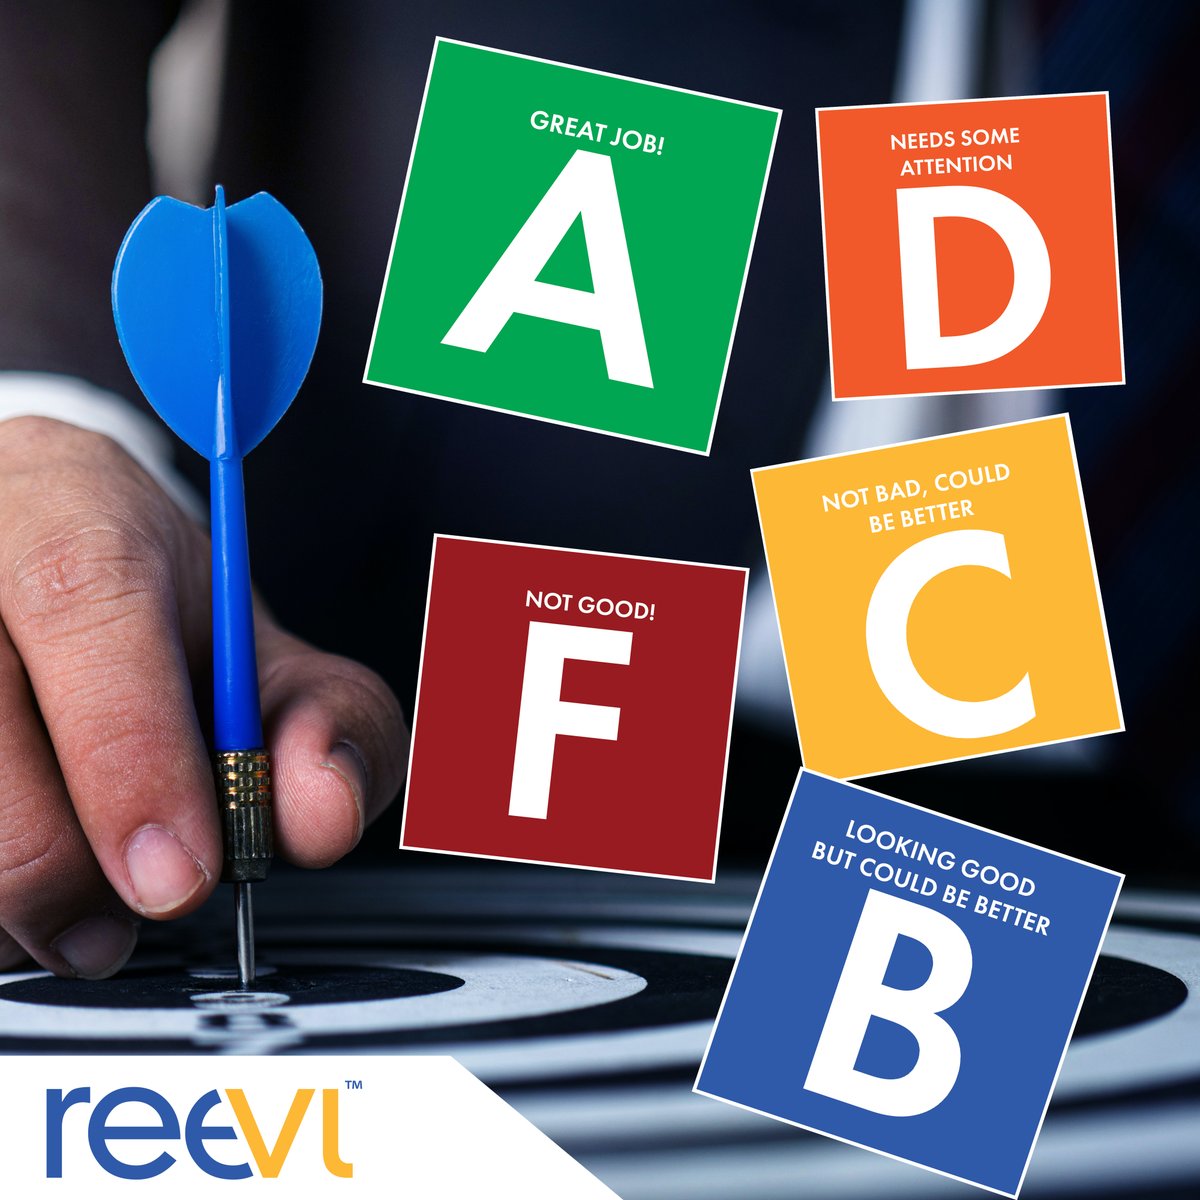 How well does your brand stand up? Take our free and easy brand assessment now and see how your business does. It takes just a minute - reevl.com/brand-analysis
 #OWNER #CEO #business #marketing #identitydesign #design #brandstrategy #smallbusiness #entrepreneur #branding